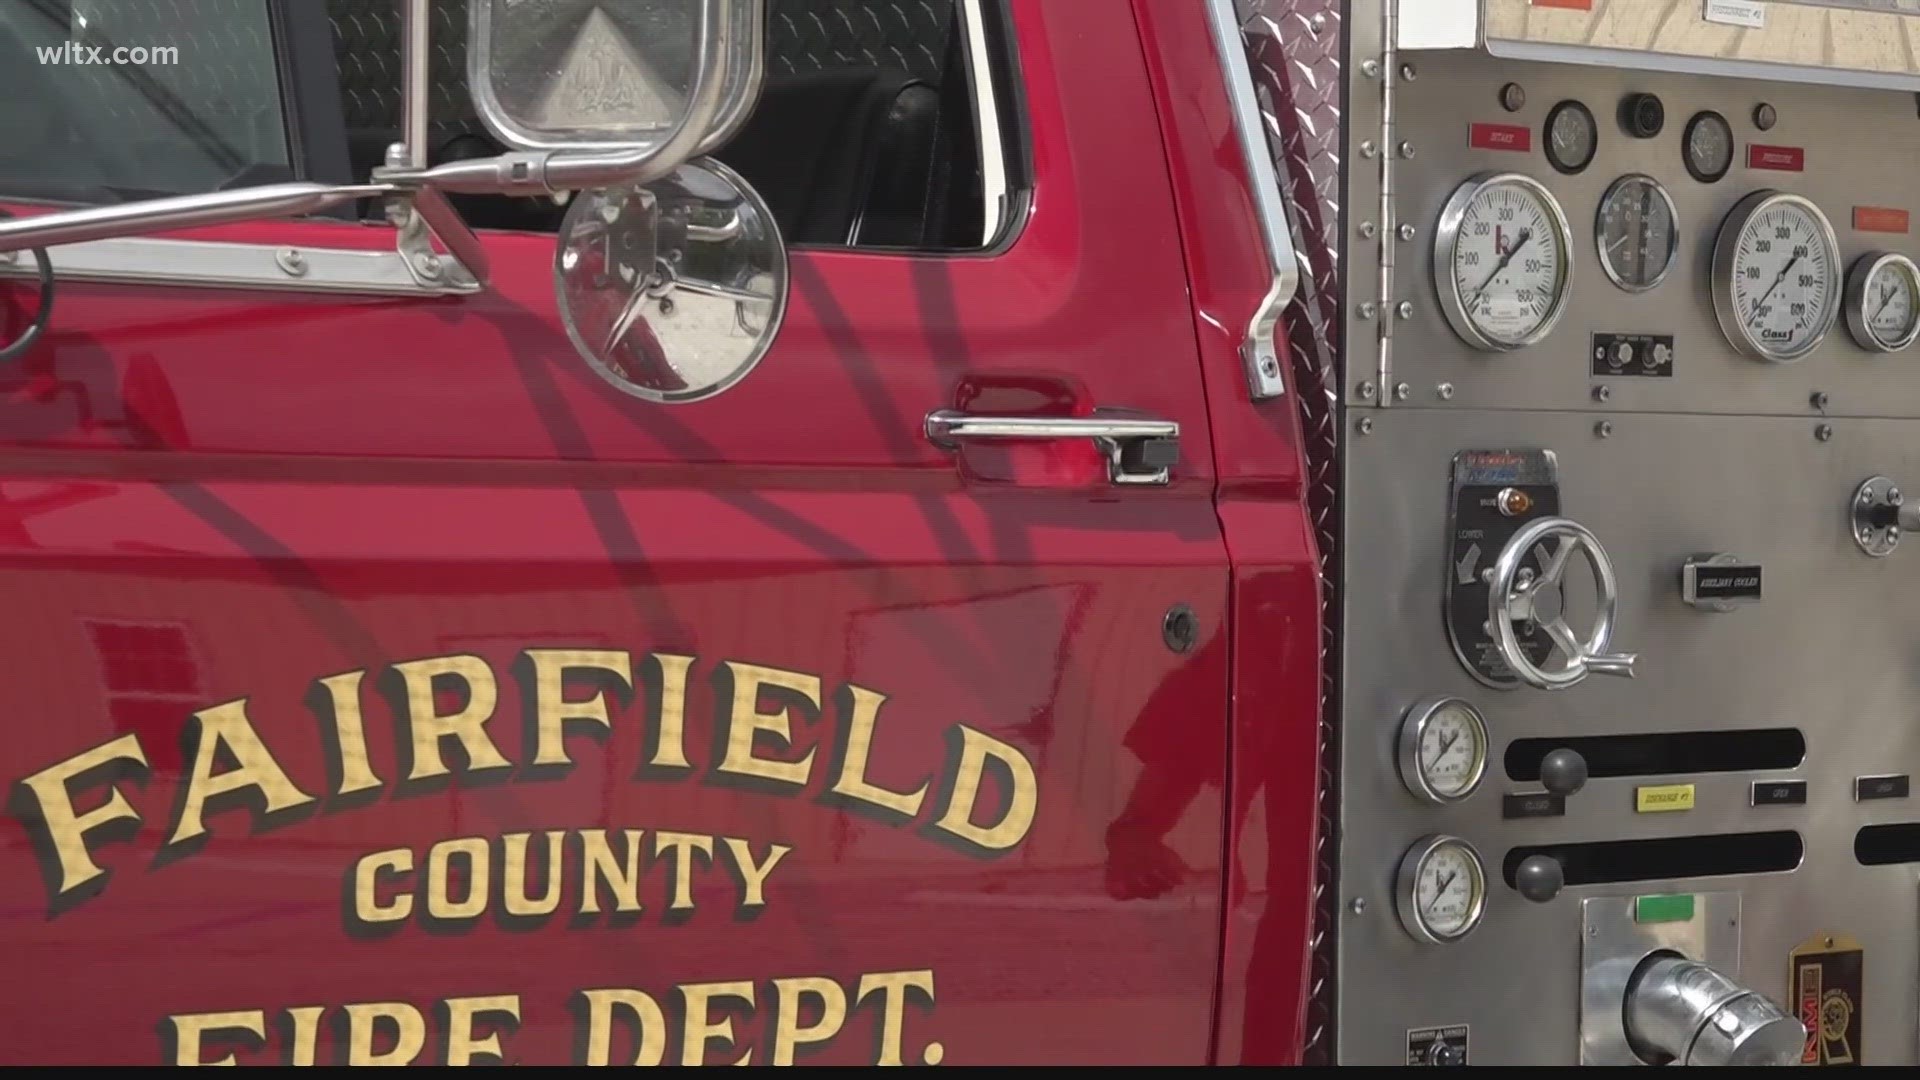 A brand new fire station in Fairfield County means a quicker response times in one of the most rural portions of the county.